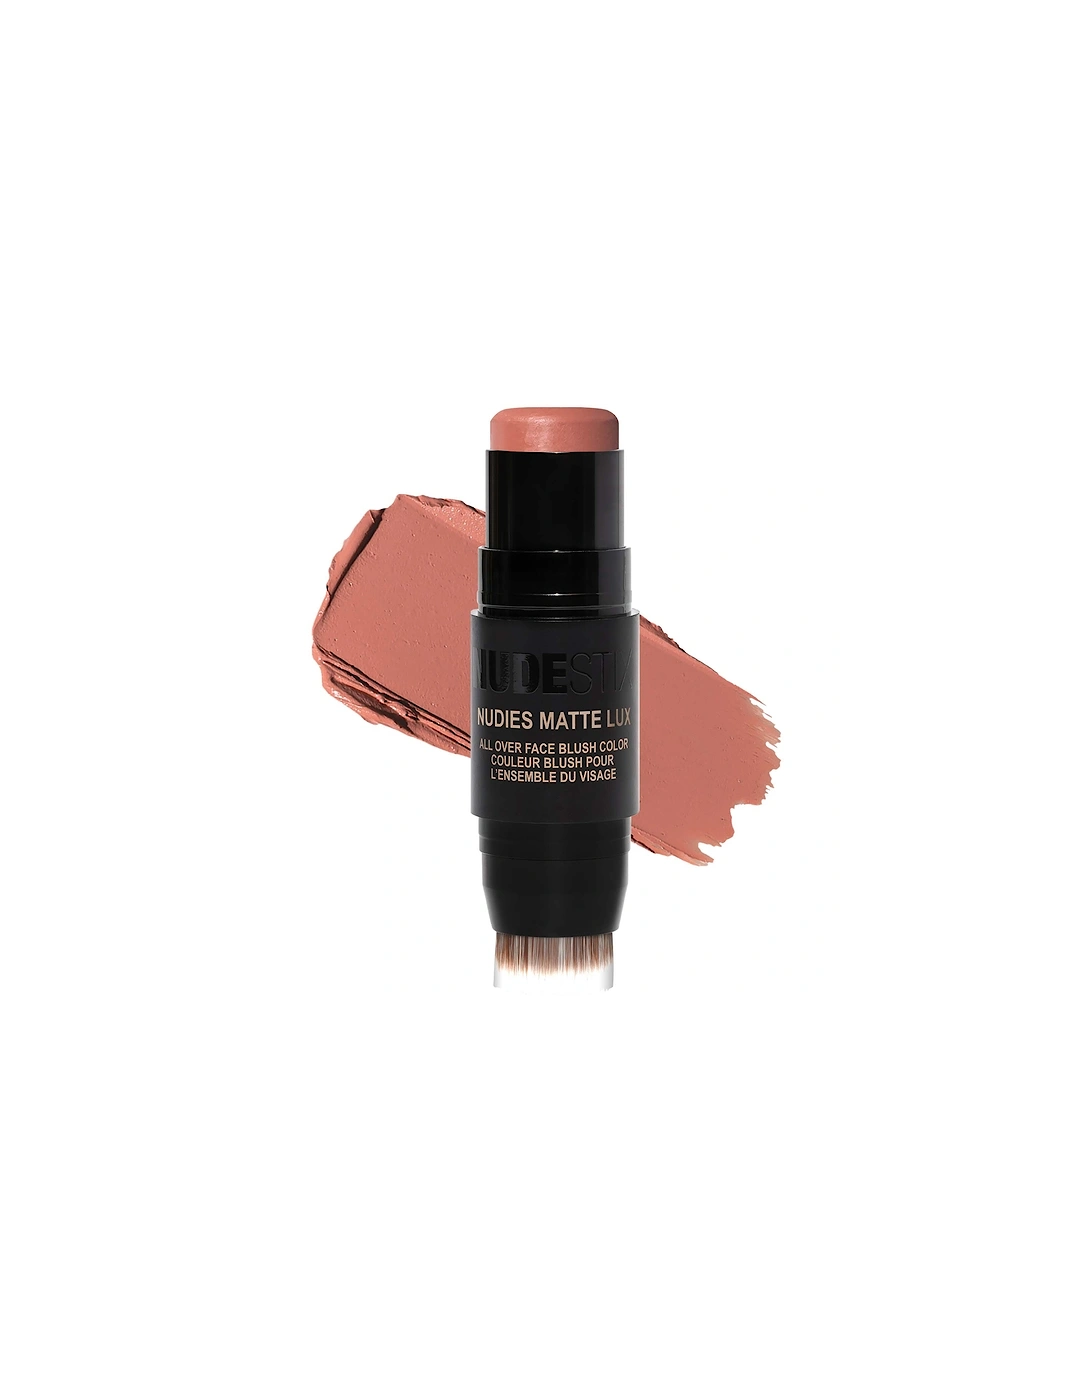 Nudies Matte Lux All Over Face Blush Colour - Nude Buff, 2 of 1